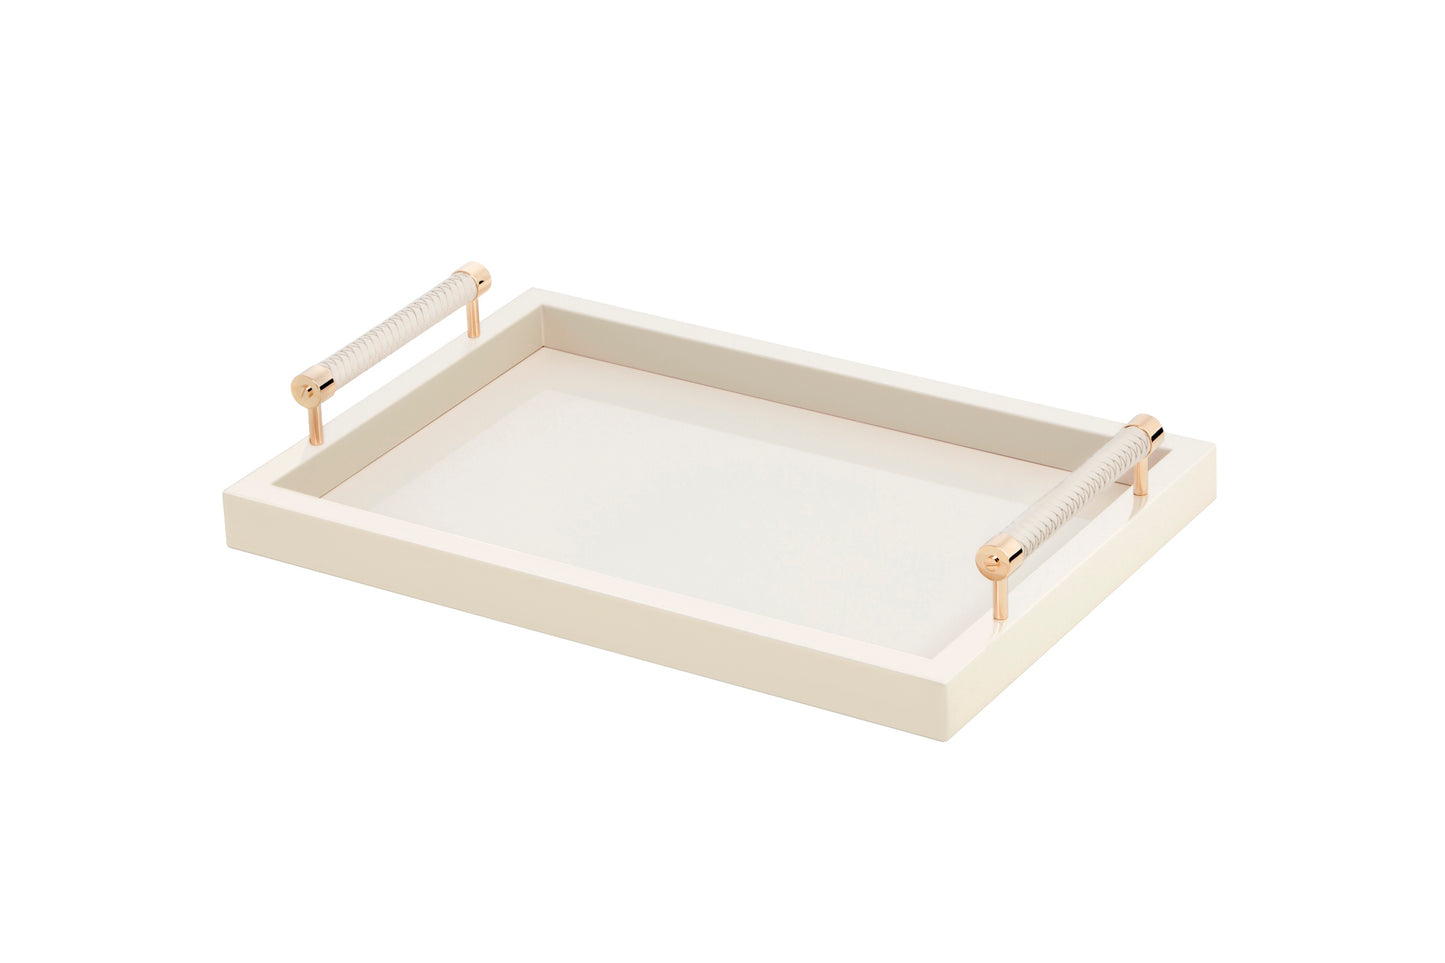 Diana Lacquer Wood Tray by Riviere | Lacquered wood tray with handwoven leather handles. | Home Decor and Serveware | 2Jour Concierge, your luxury lifestyle shop